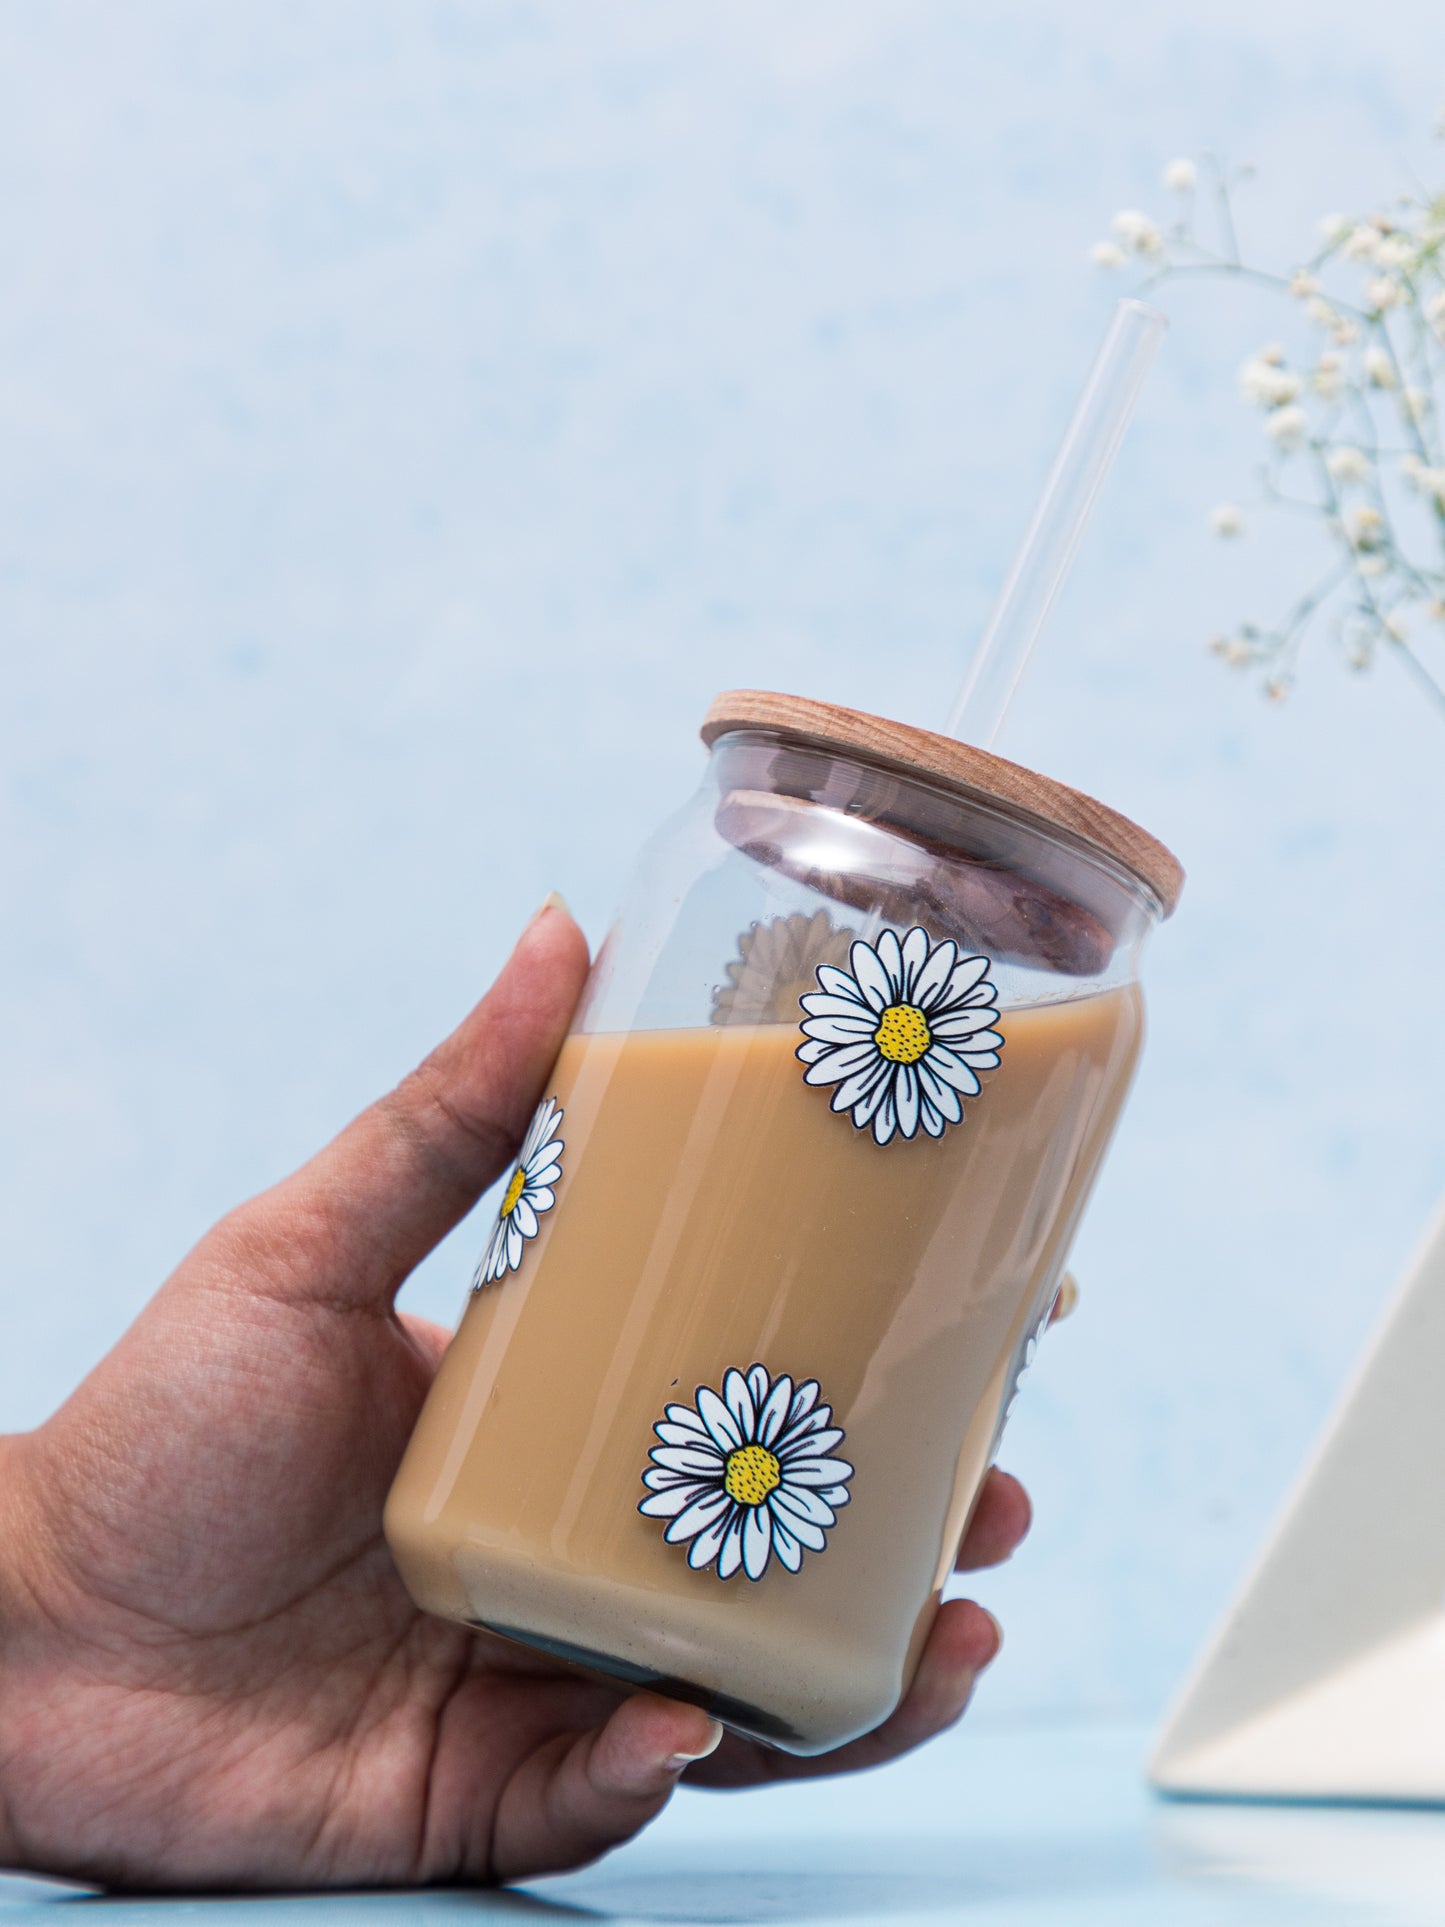 Can Shaped Sipper 500ml| Daisies Print | 18oz Can Tumbler with lid, straw and coaster.